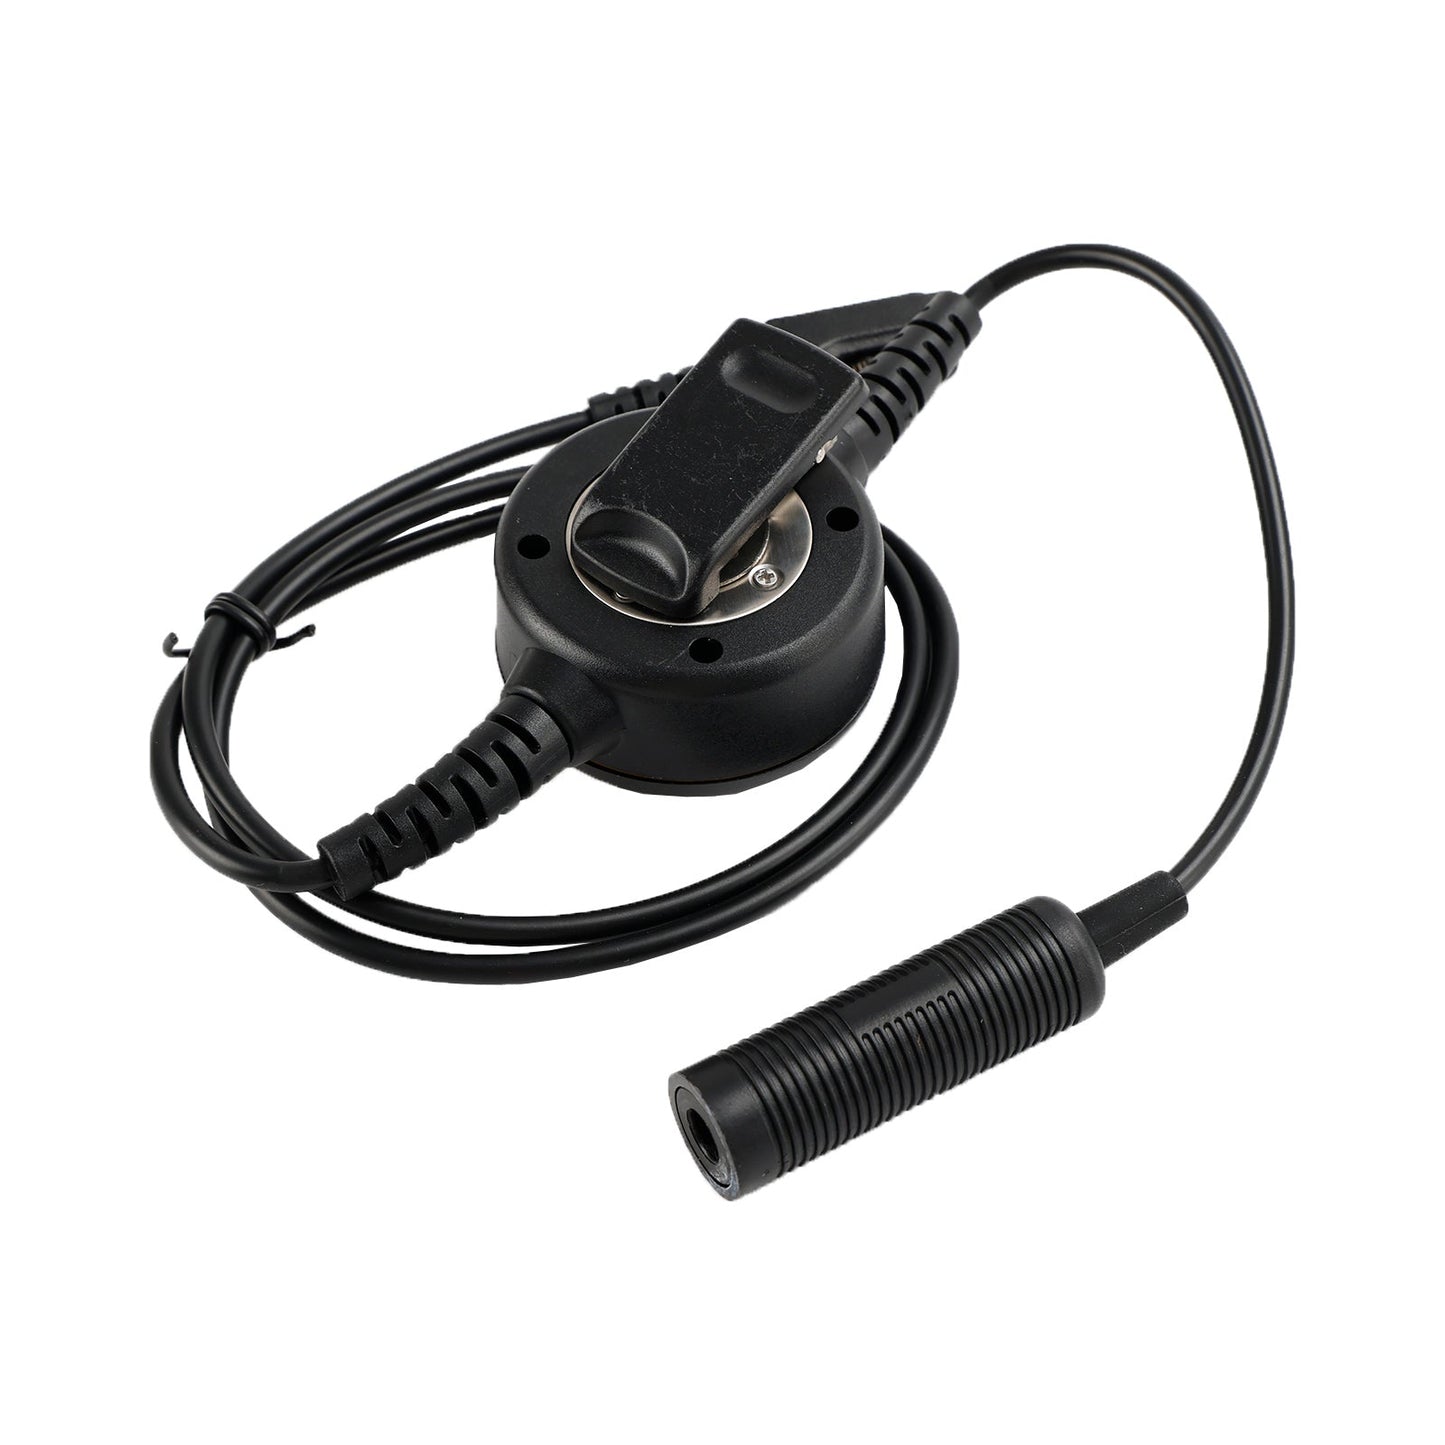 For Hytera PD780G/580/788 6-Pin U94 PTT Z-Tactical Throat Mic Adjustable Headset